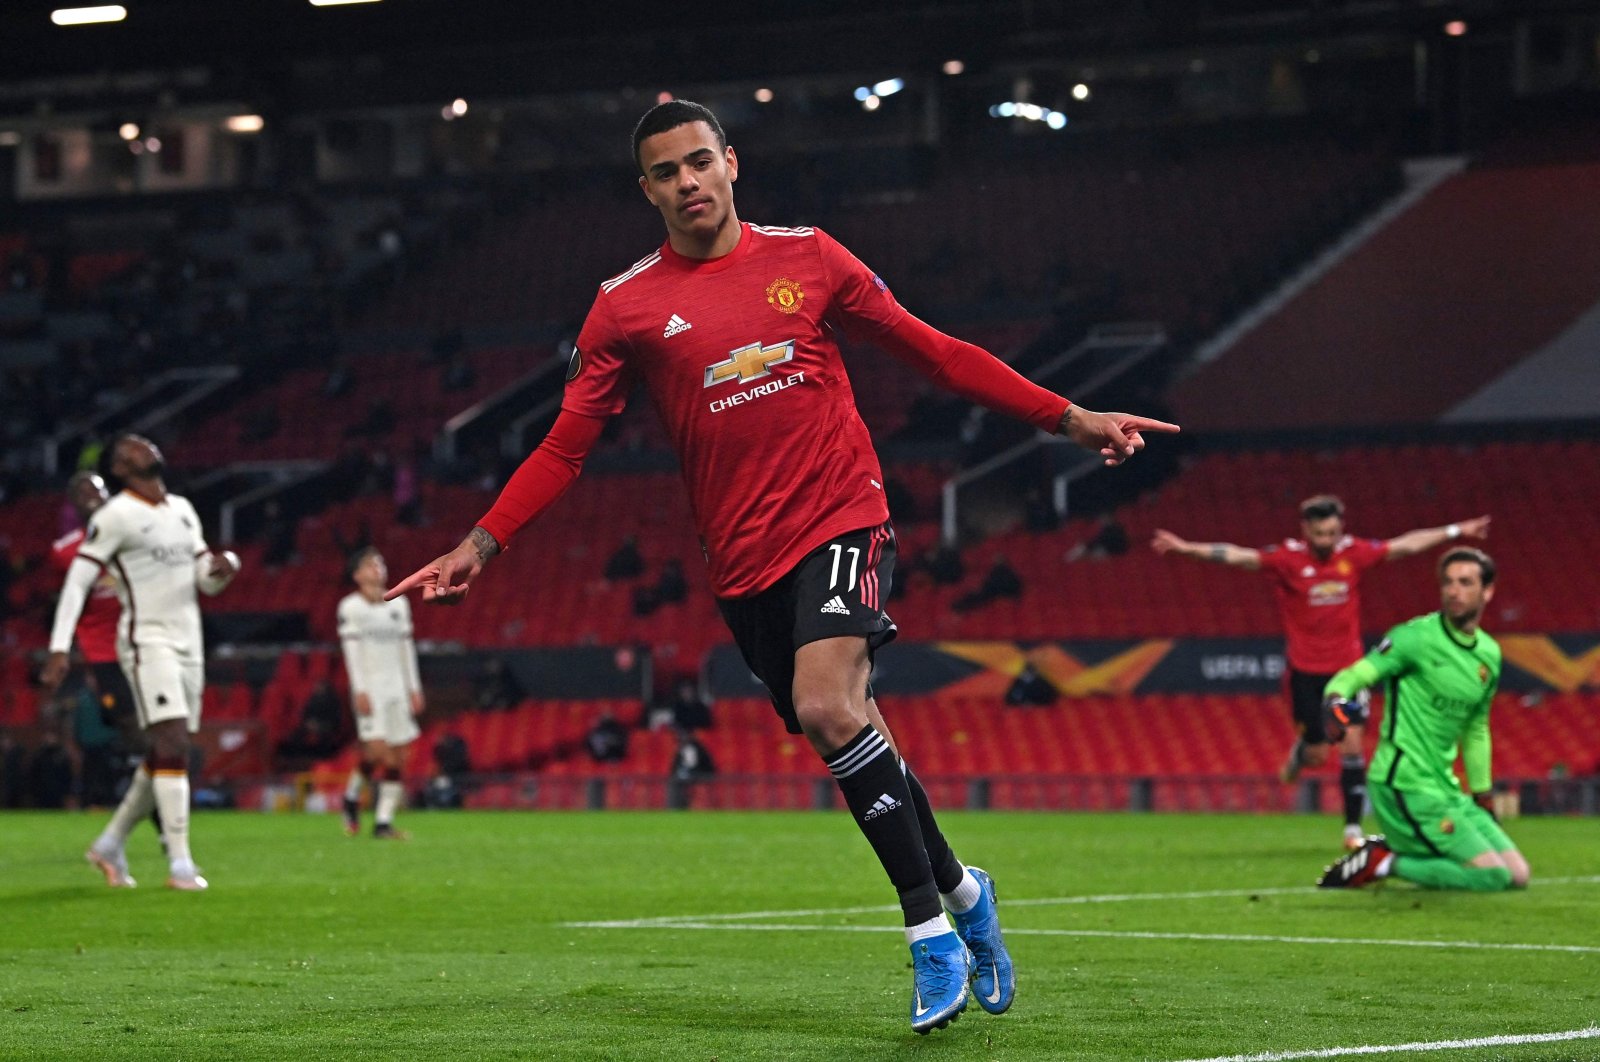 Manchester United&#039;s English striker Mason Greenwood celebrates after scoring their sixth goal during the UEFA Europa League semifinal first leg match against Roma at Old Trafford stadium, Manchester, U.K., April 29, 2021. (AFP Photo)